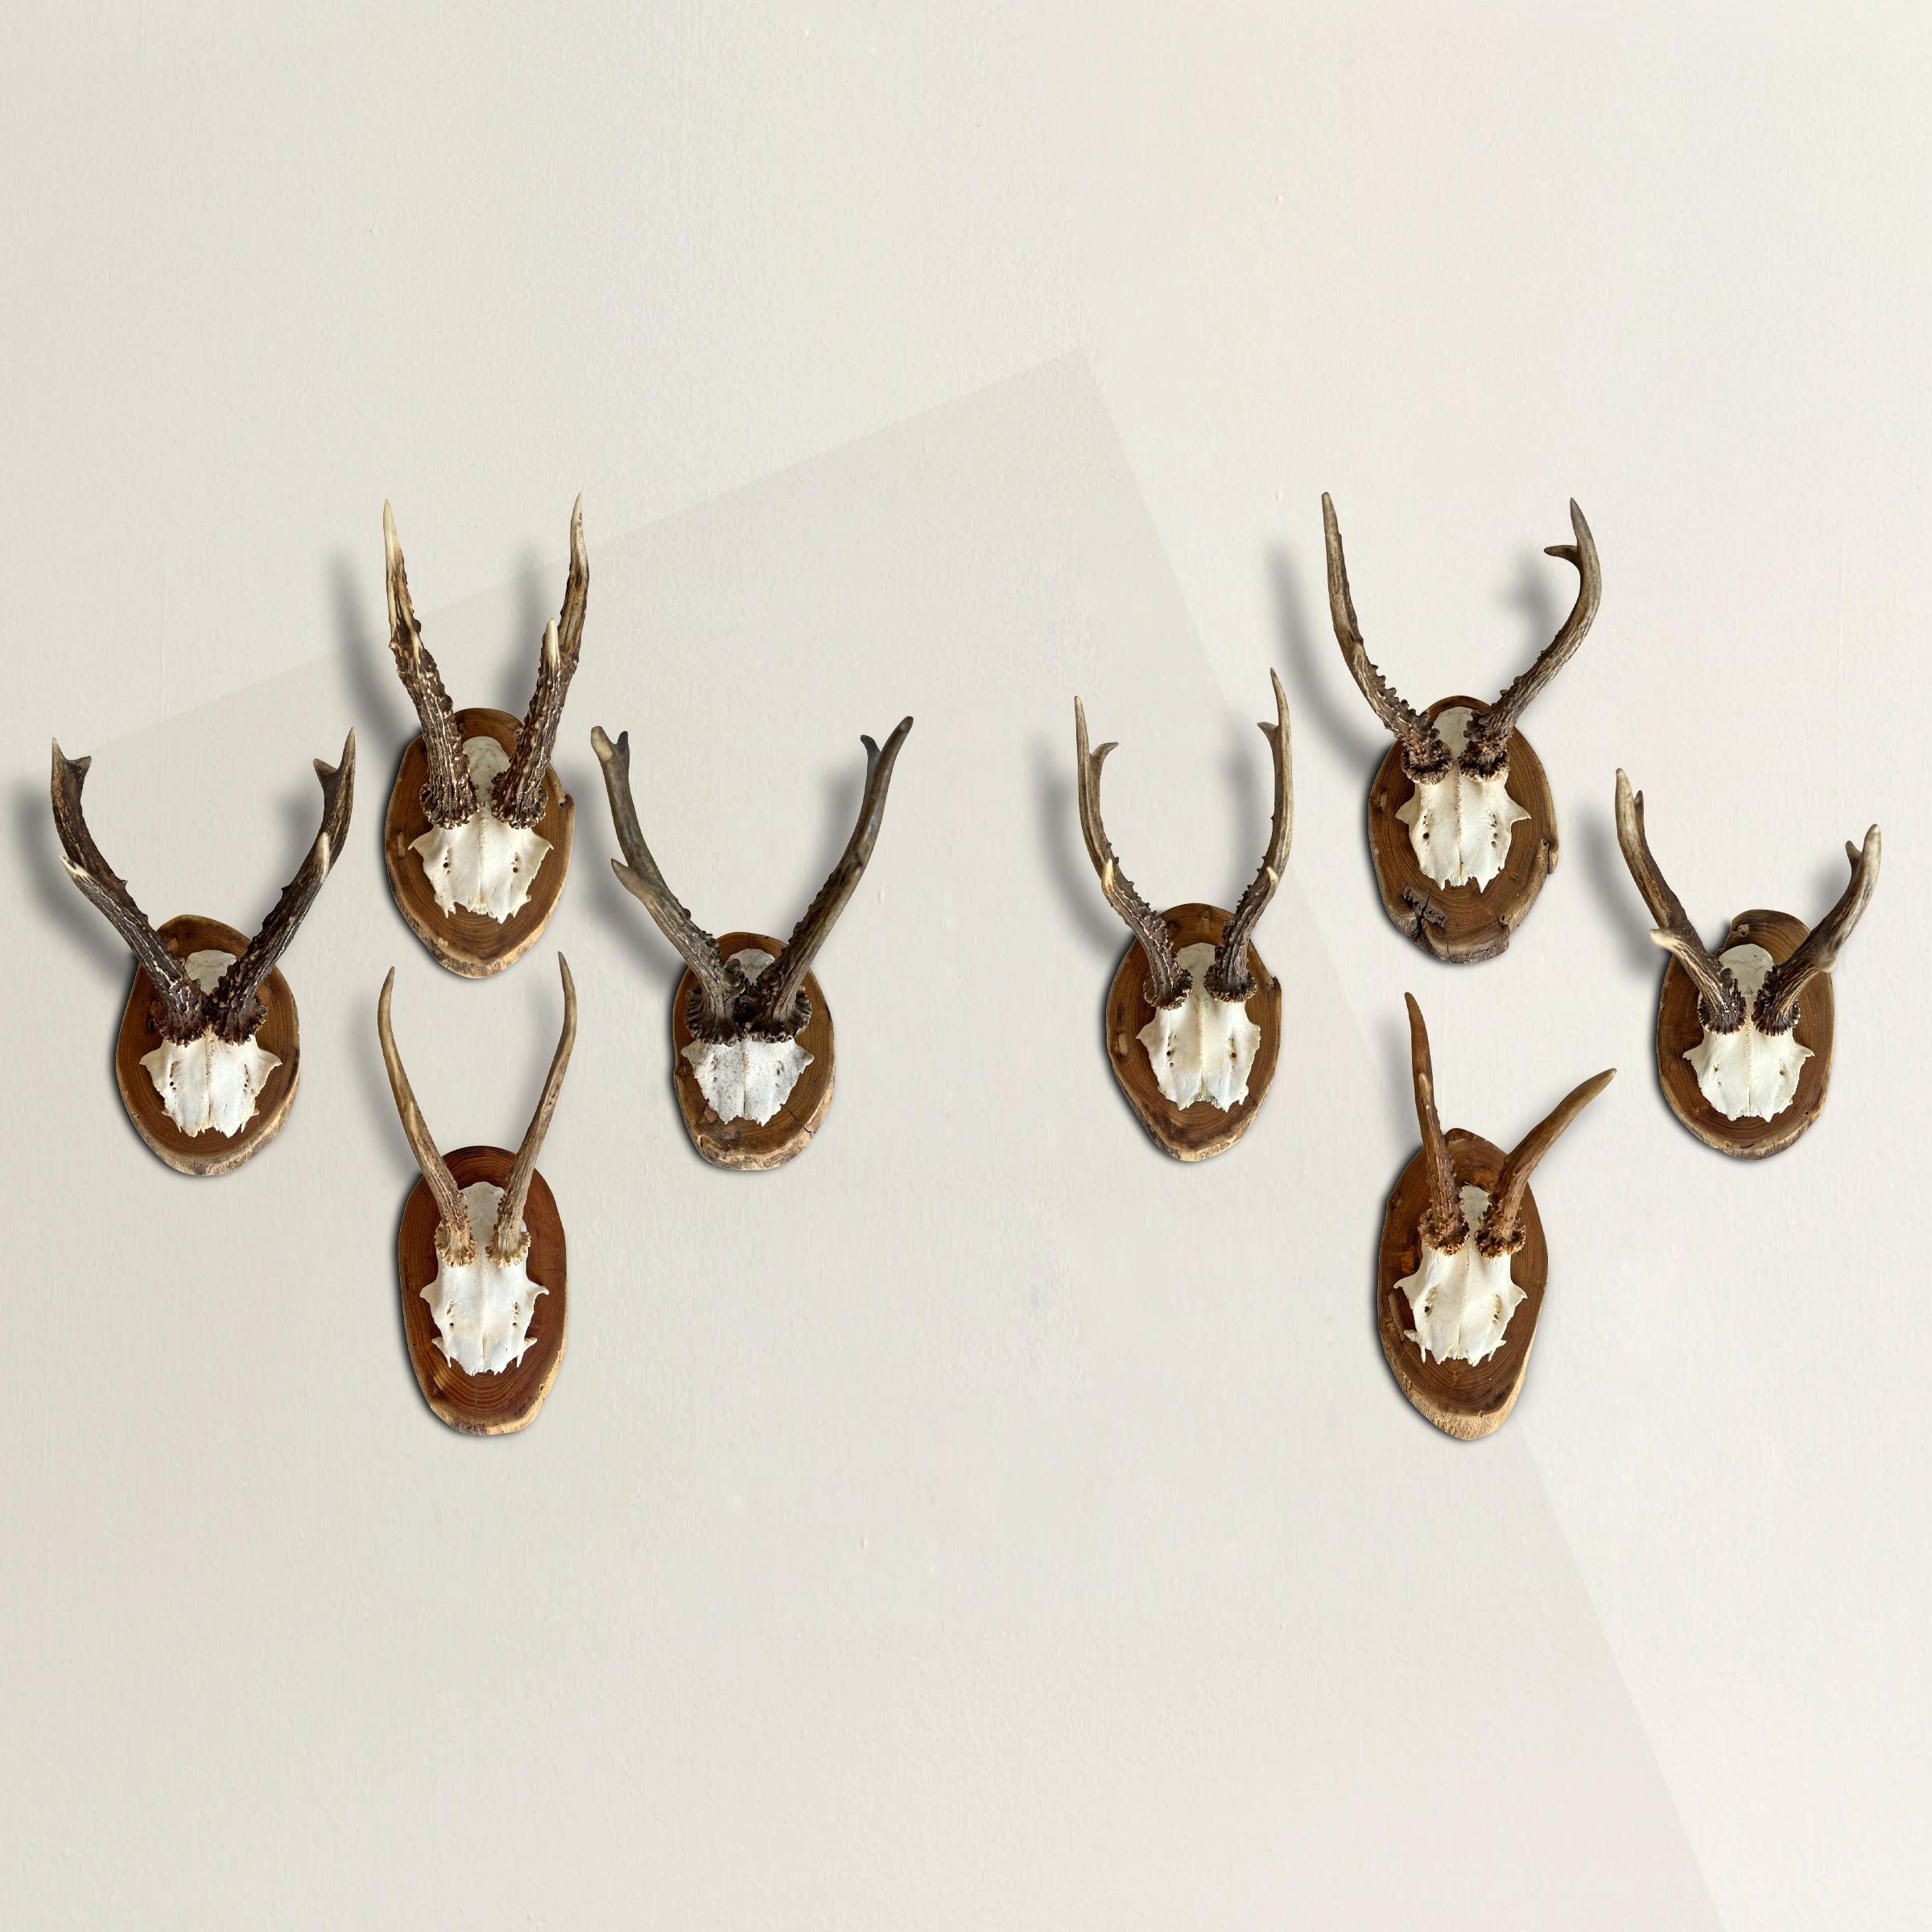 A collection of eight 20th century German Roe Deer trophy mounts including the skull caps and antlers. In years past only landowners were allowed to hunt game, and often showed off their wealth by hanging trophy mounts throughout their grande